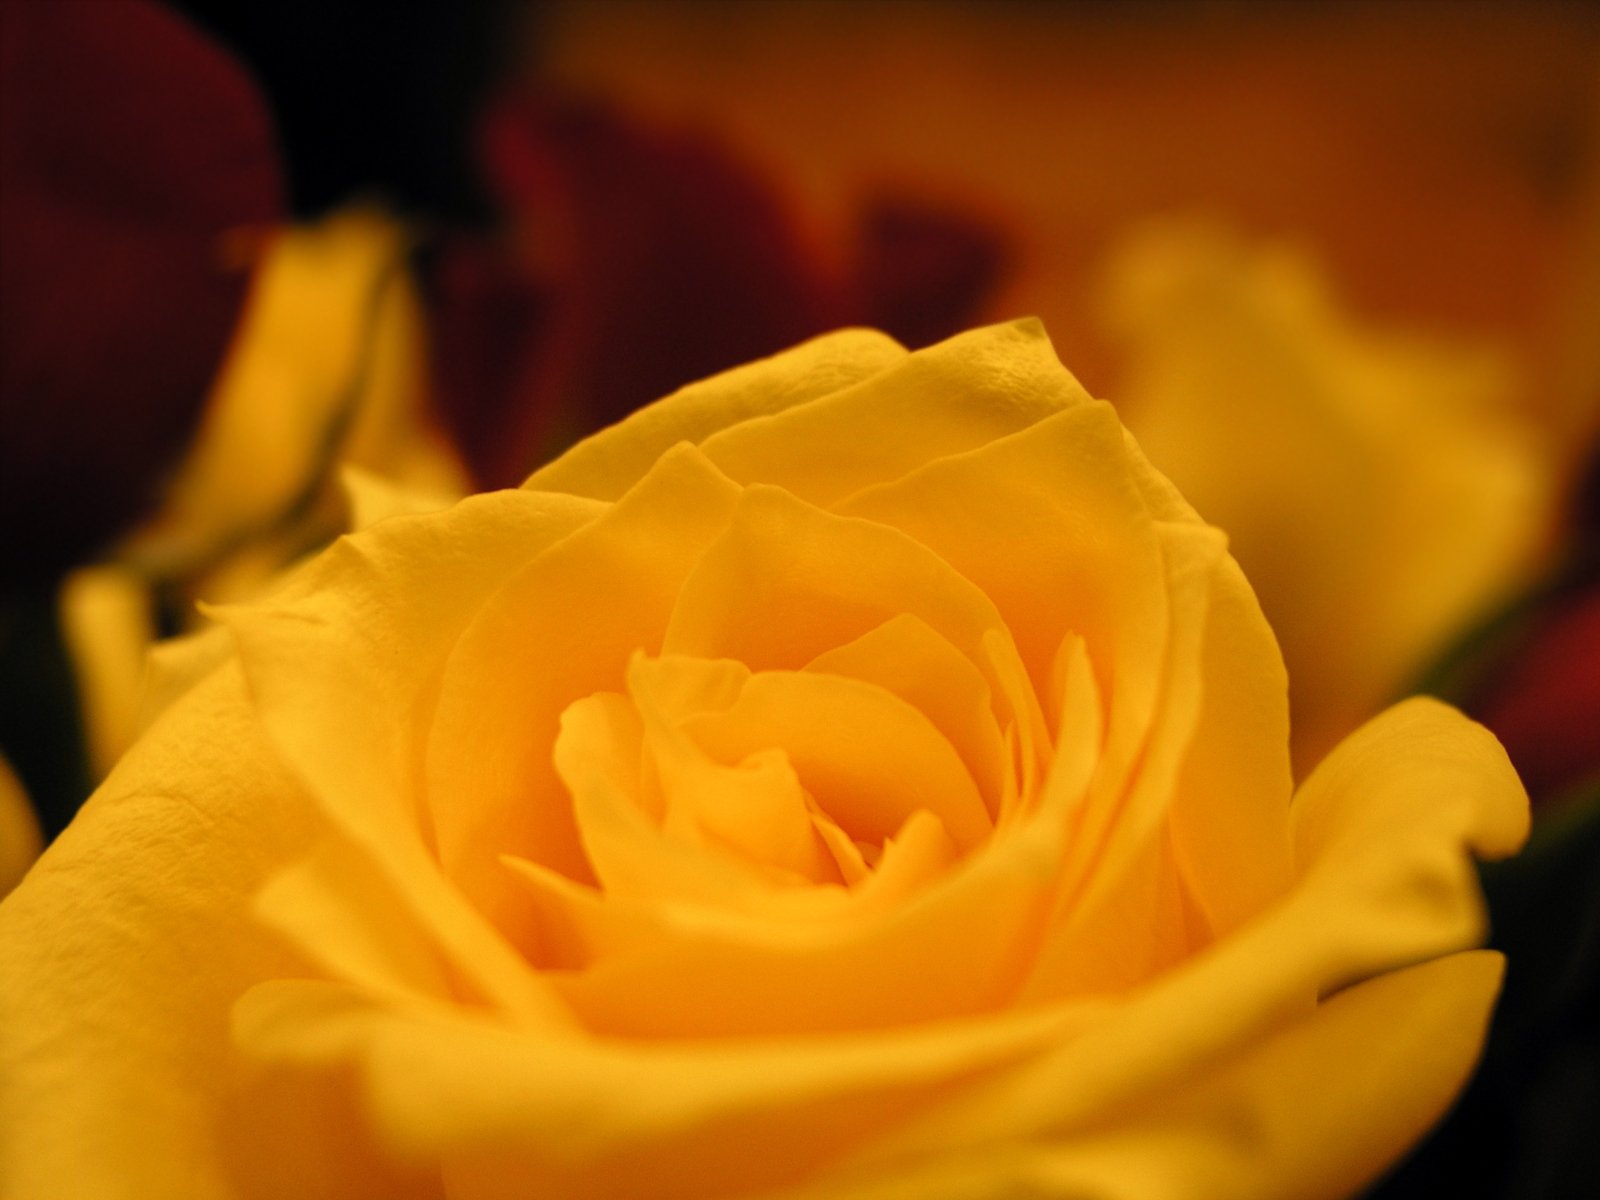 yellow rose in focus and red roses behind it